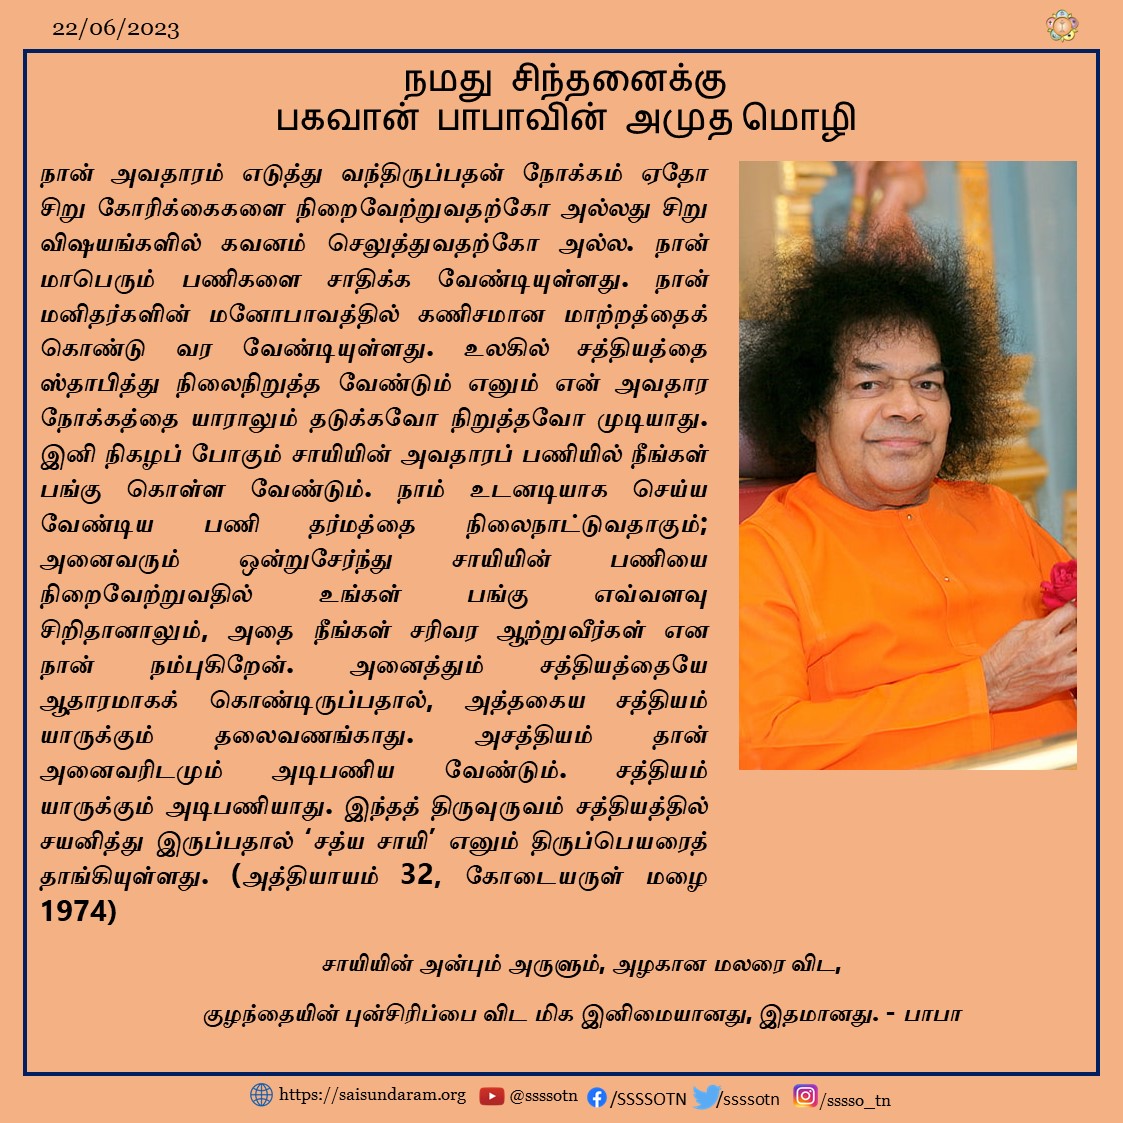 Thought For the Day | 22nd June 2023  Our Most Beloved Bhagawan's Divine Message As Written in Prashanthi Nilayam, Puttaparthi   Source - Ch 32 Summer Showers 1974.   #SriSathyaSai #SriSathyaSaibaba #SriSathyaSai #ThoughtforTheDay #Divinemessage